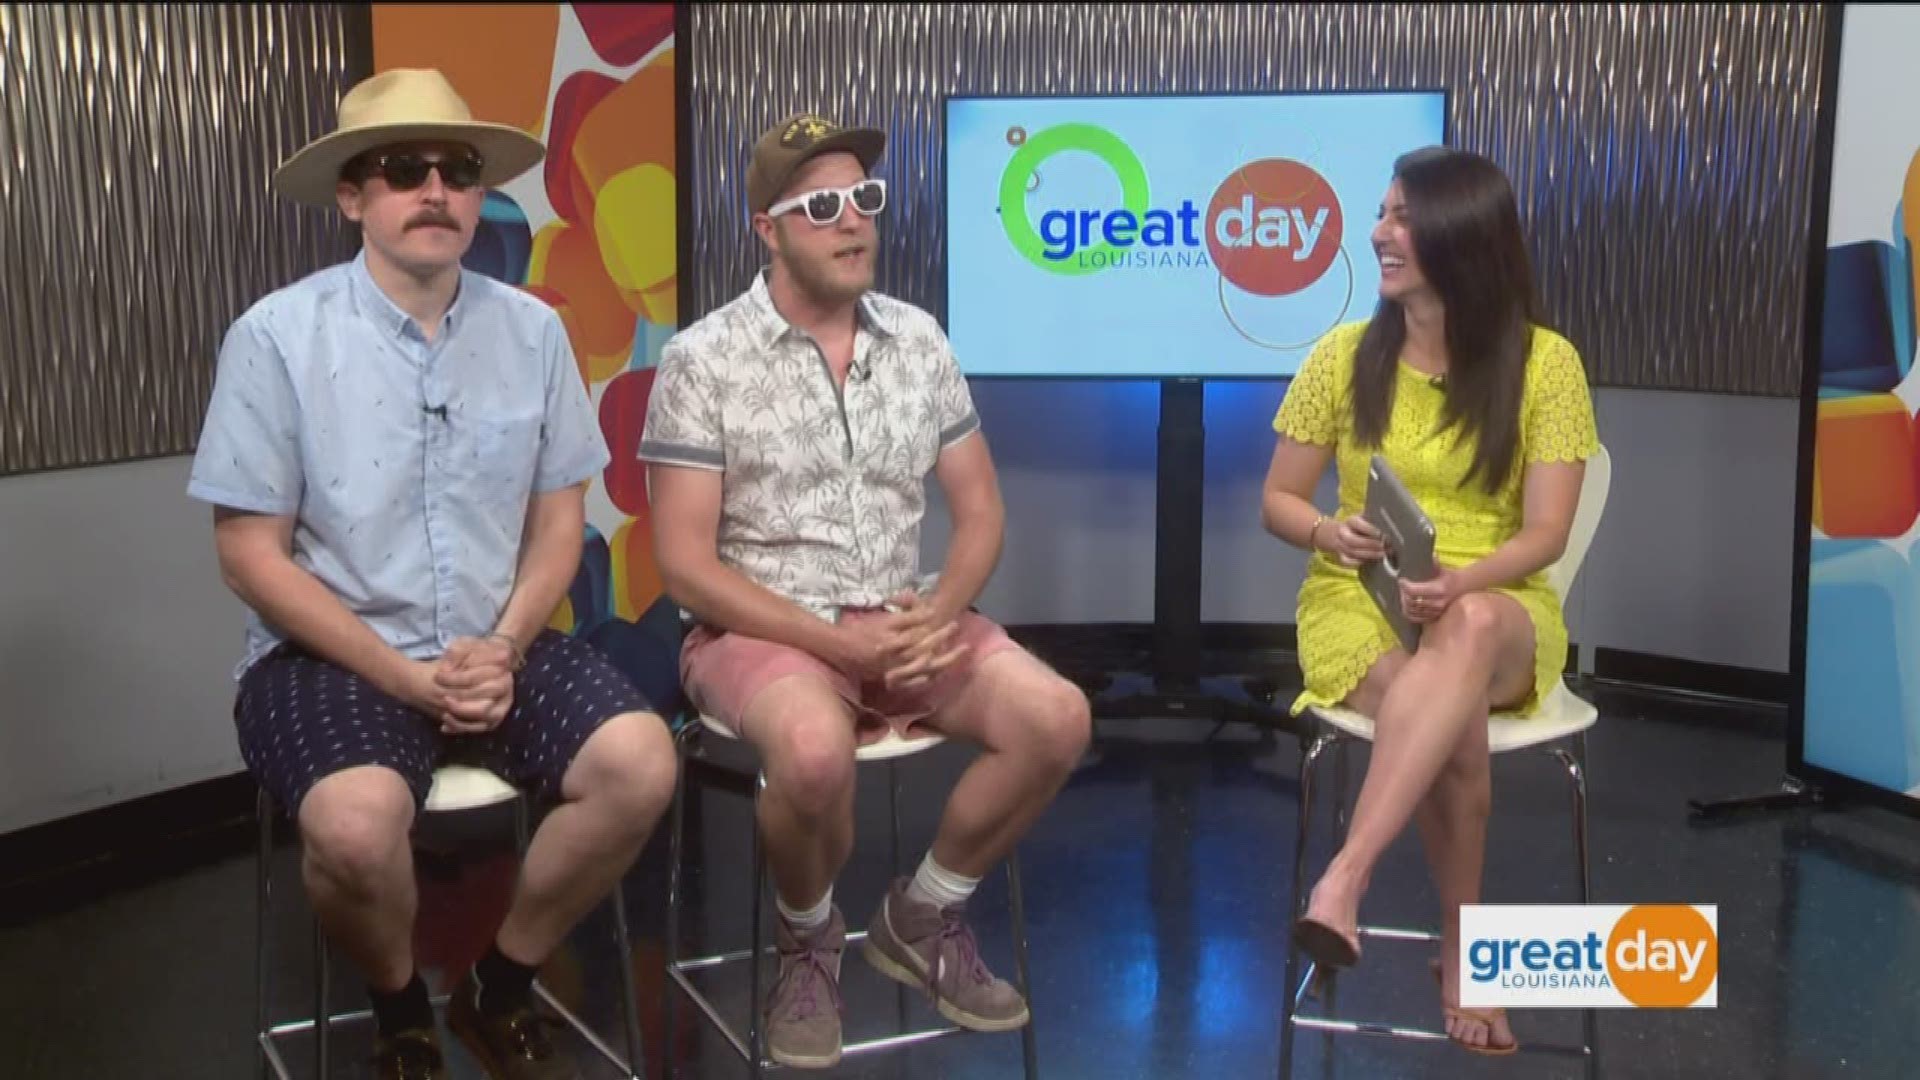 Max "Mudskipper" Mendizabel and Ian "Squid" Finch of surf rock band Shark Attack join Great Day to tell us the story behind the name and get a feel for their musical sound.